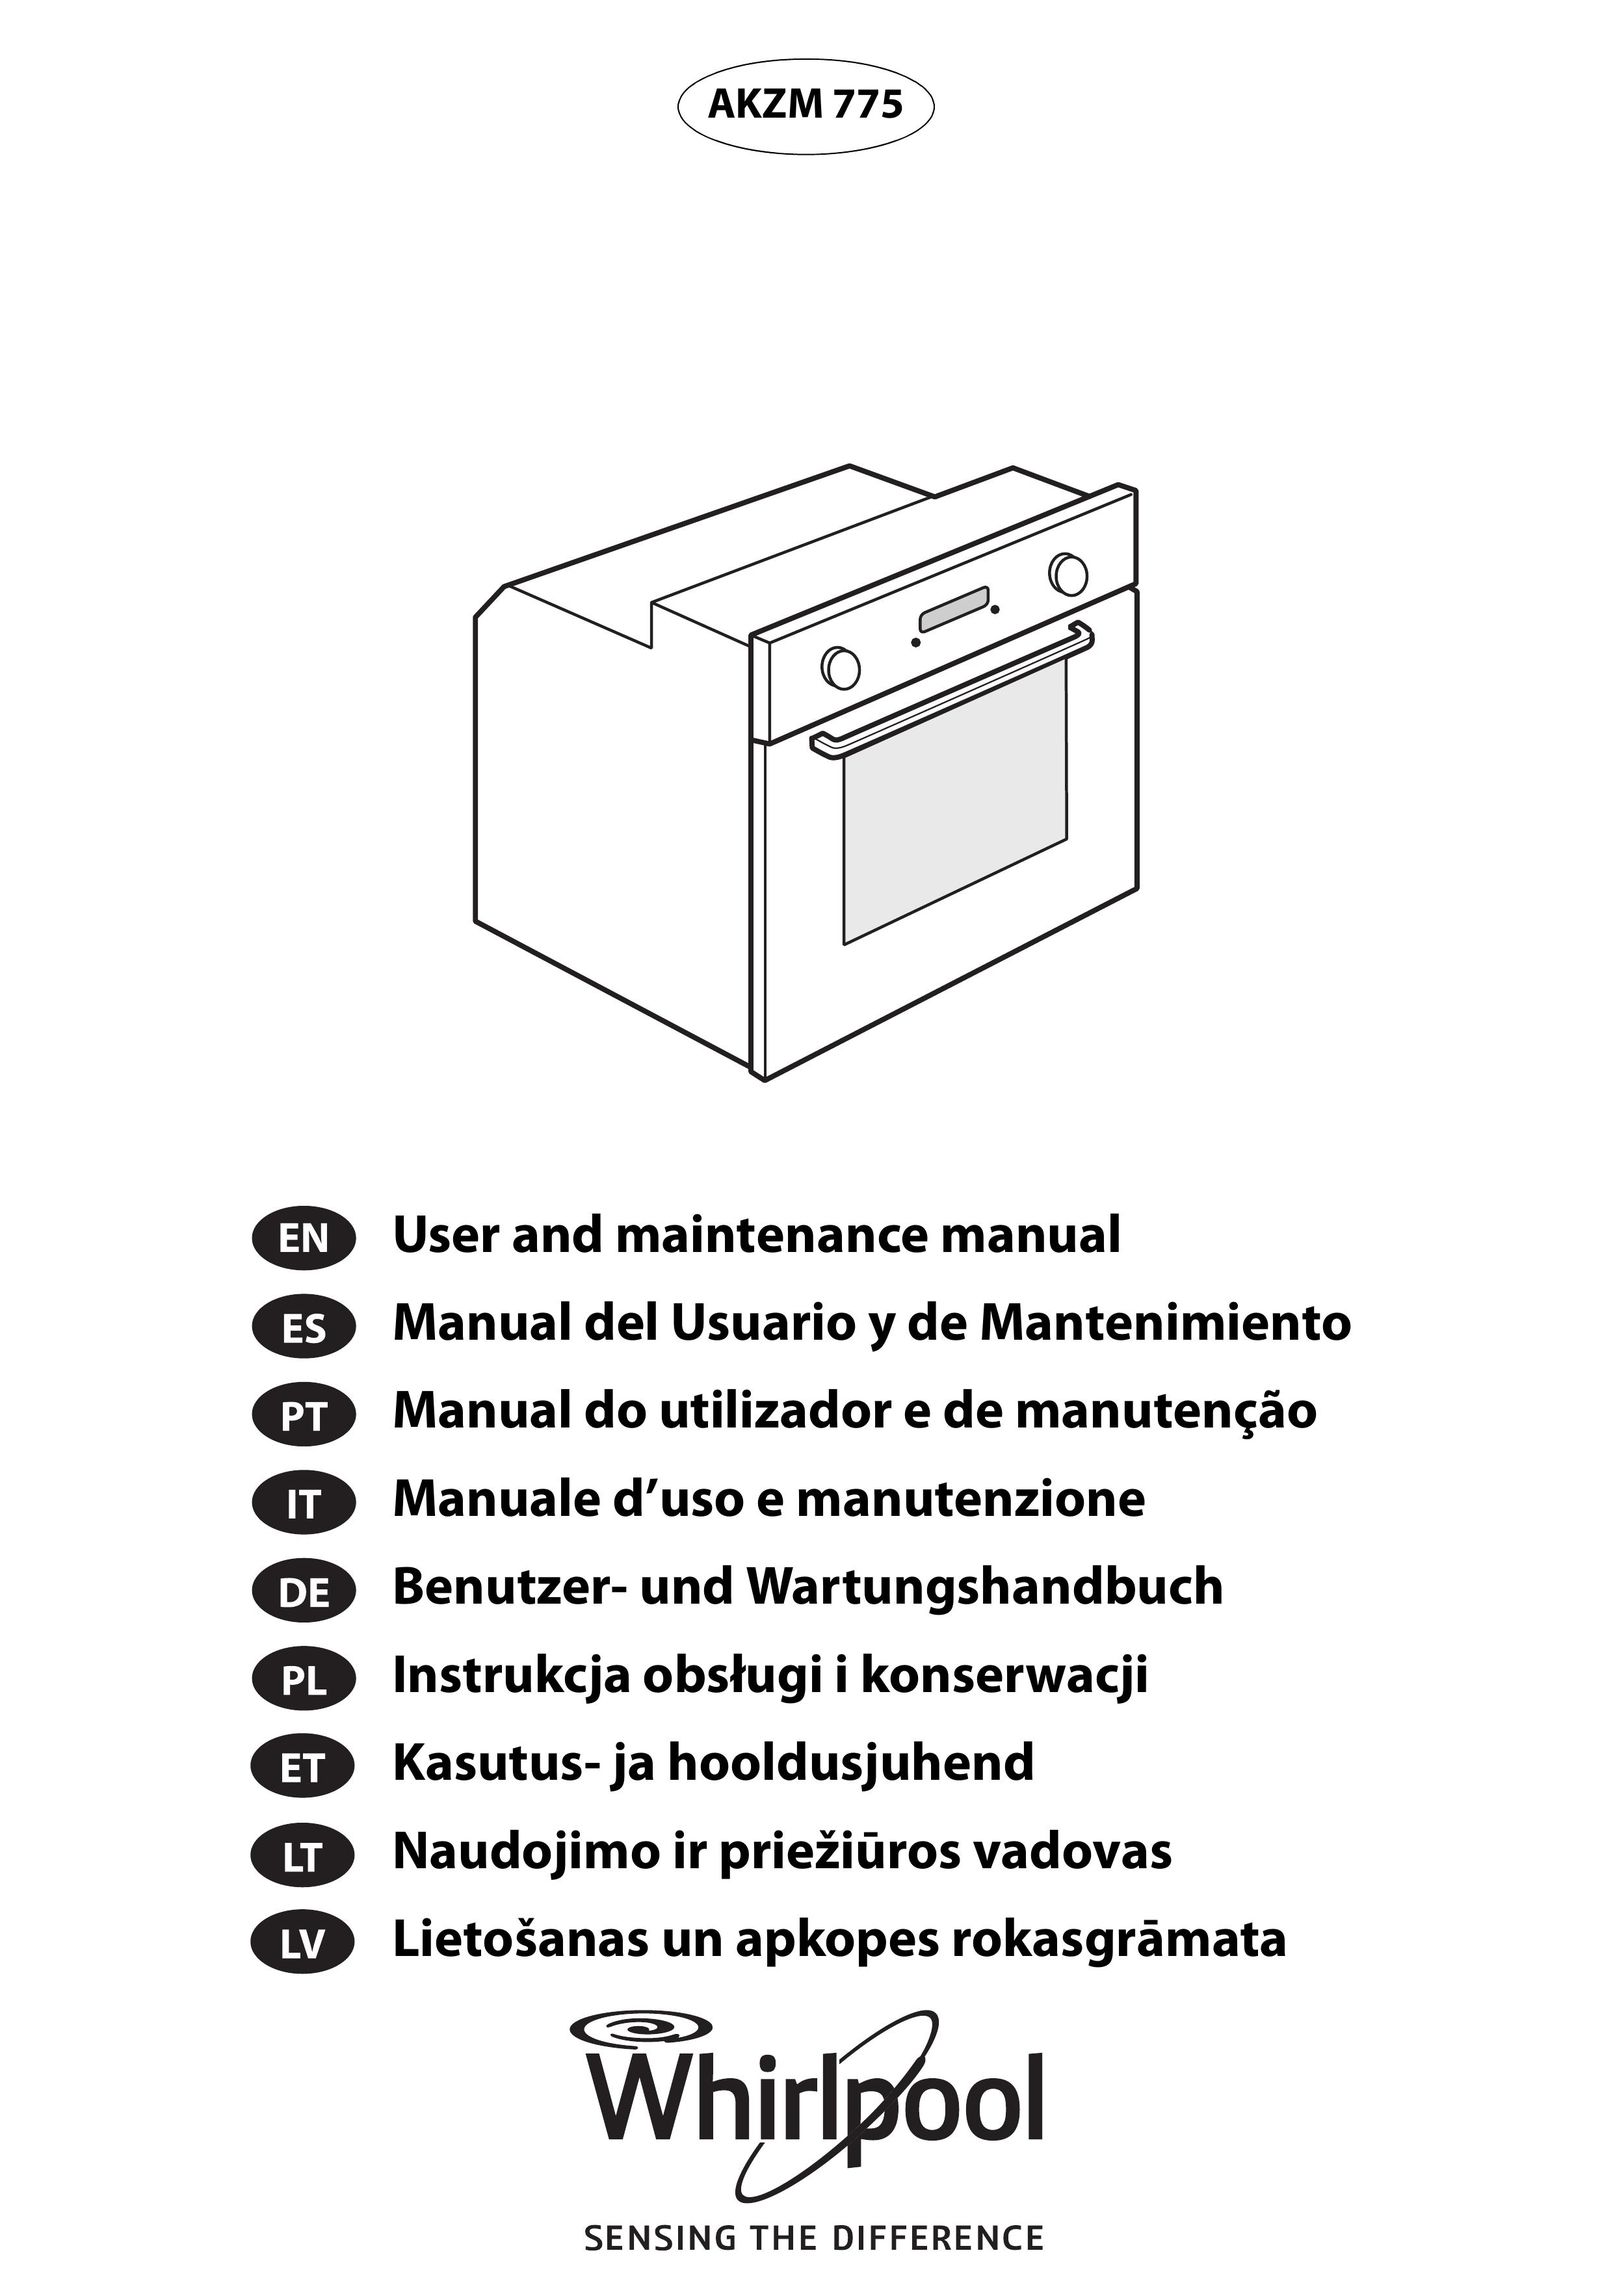 Whirlpool AKZM 775 Oven User Manual